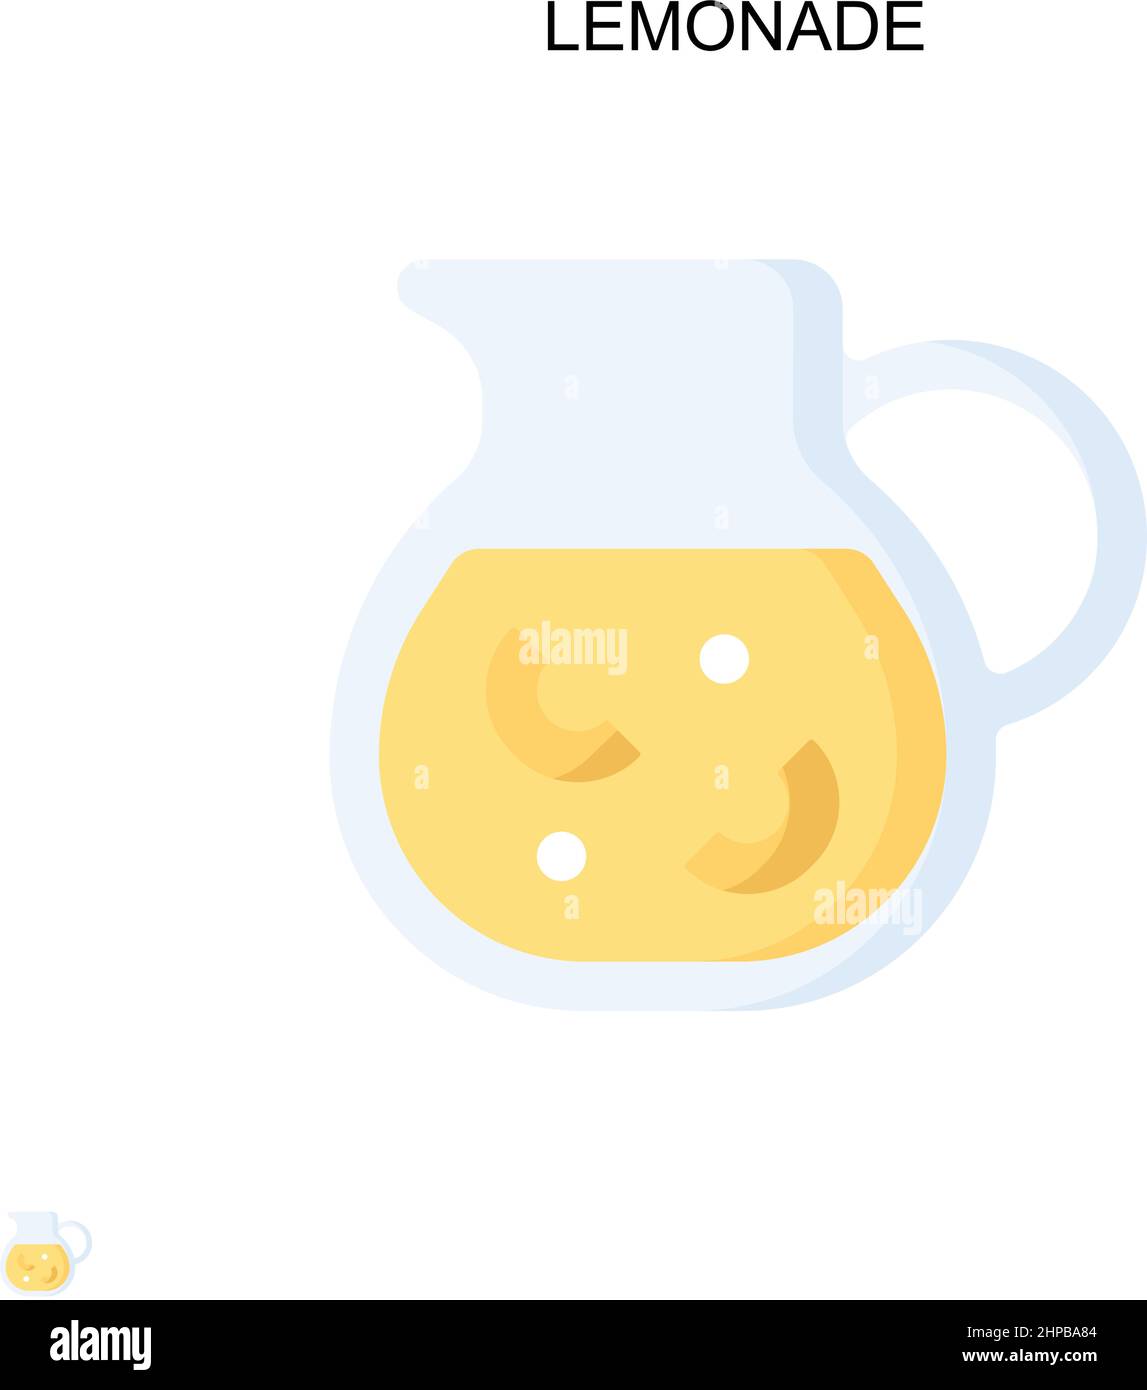 Lemonade Pitcher Jug With Lemons And Mint Leaf Icon Vector Stock